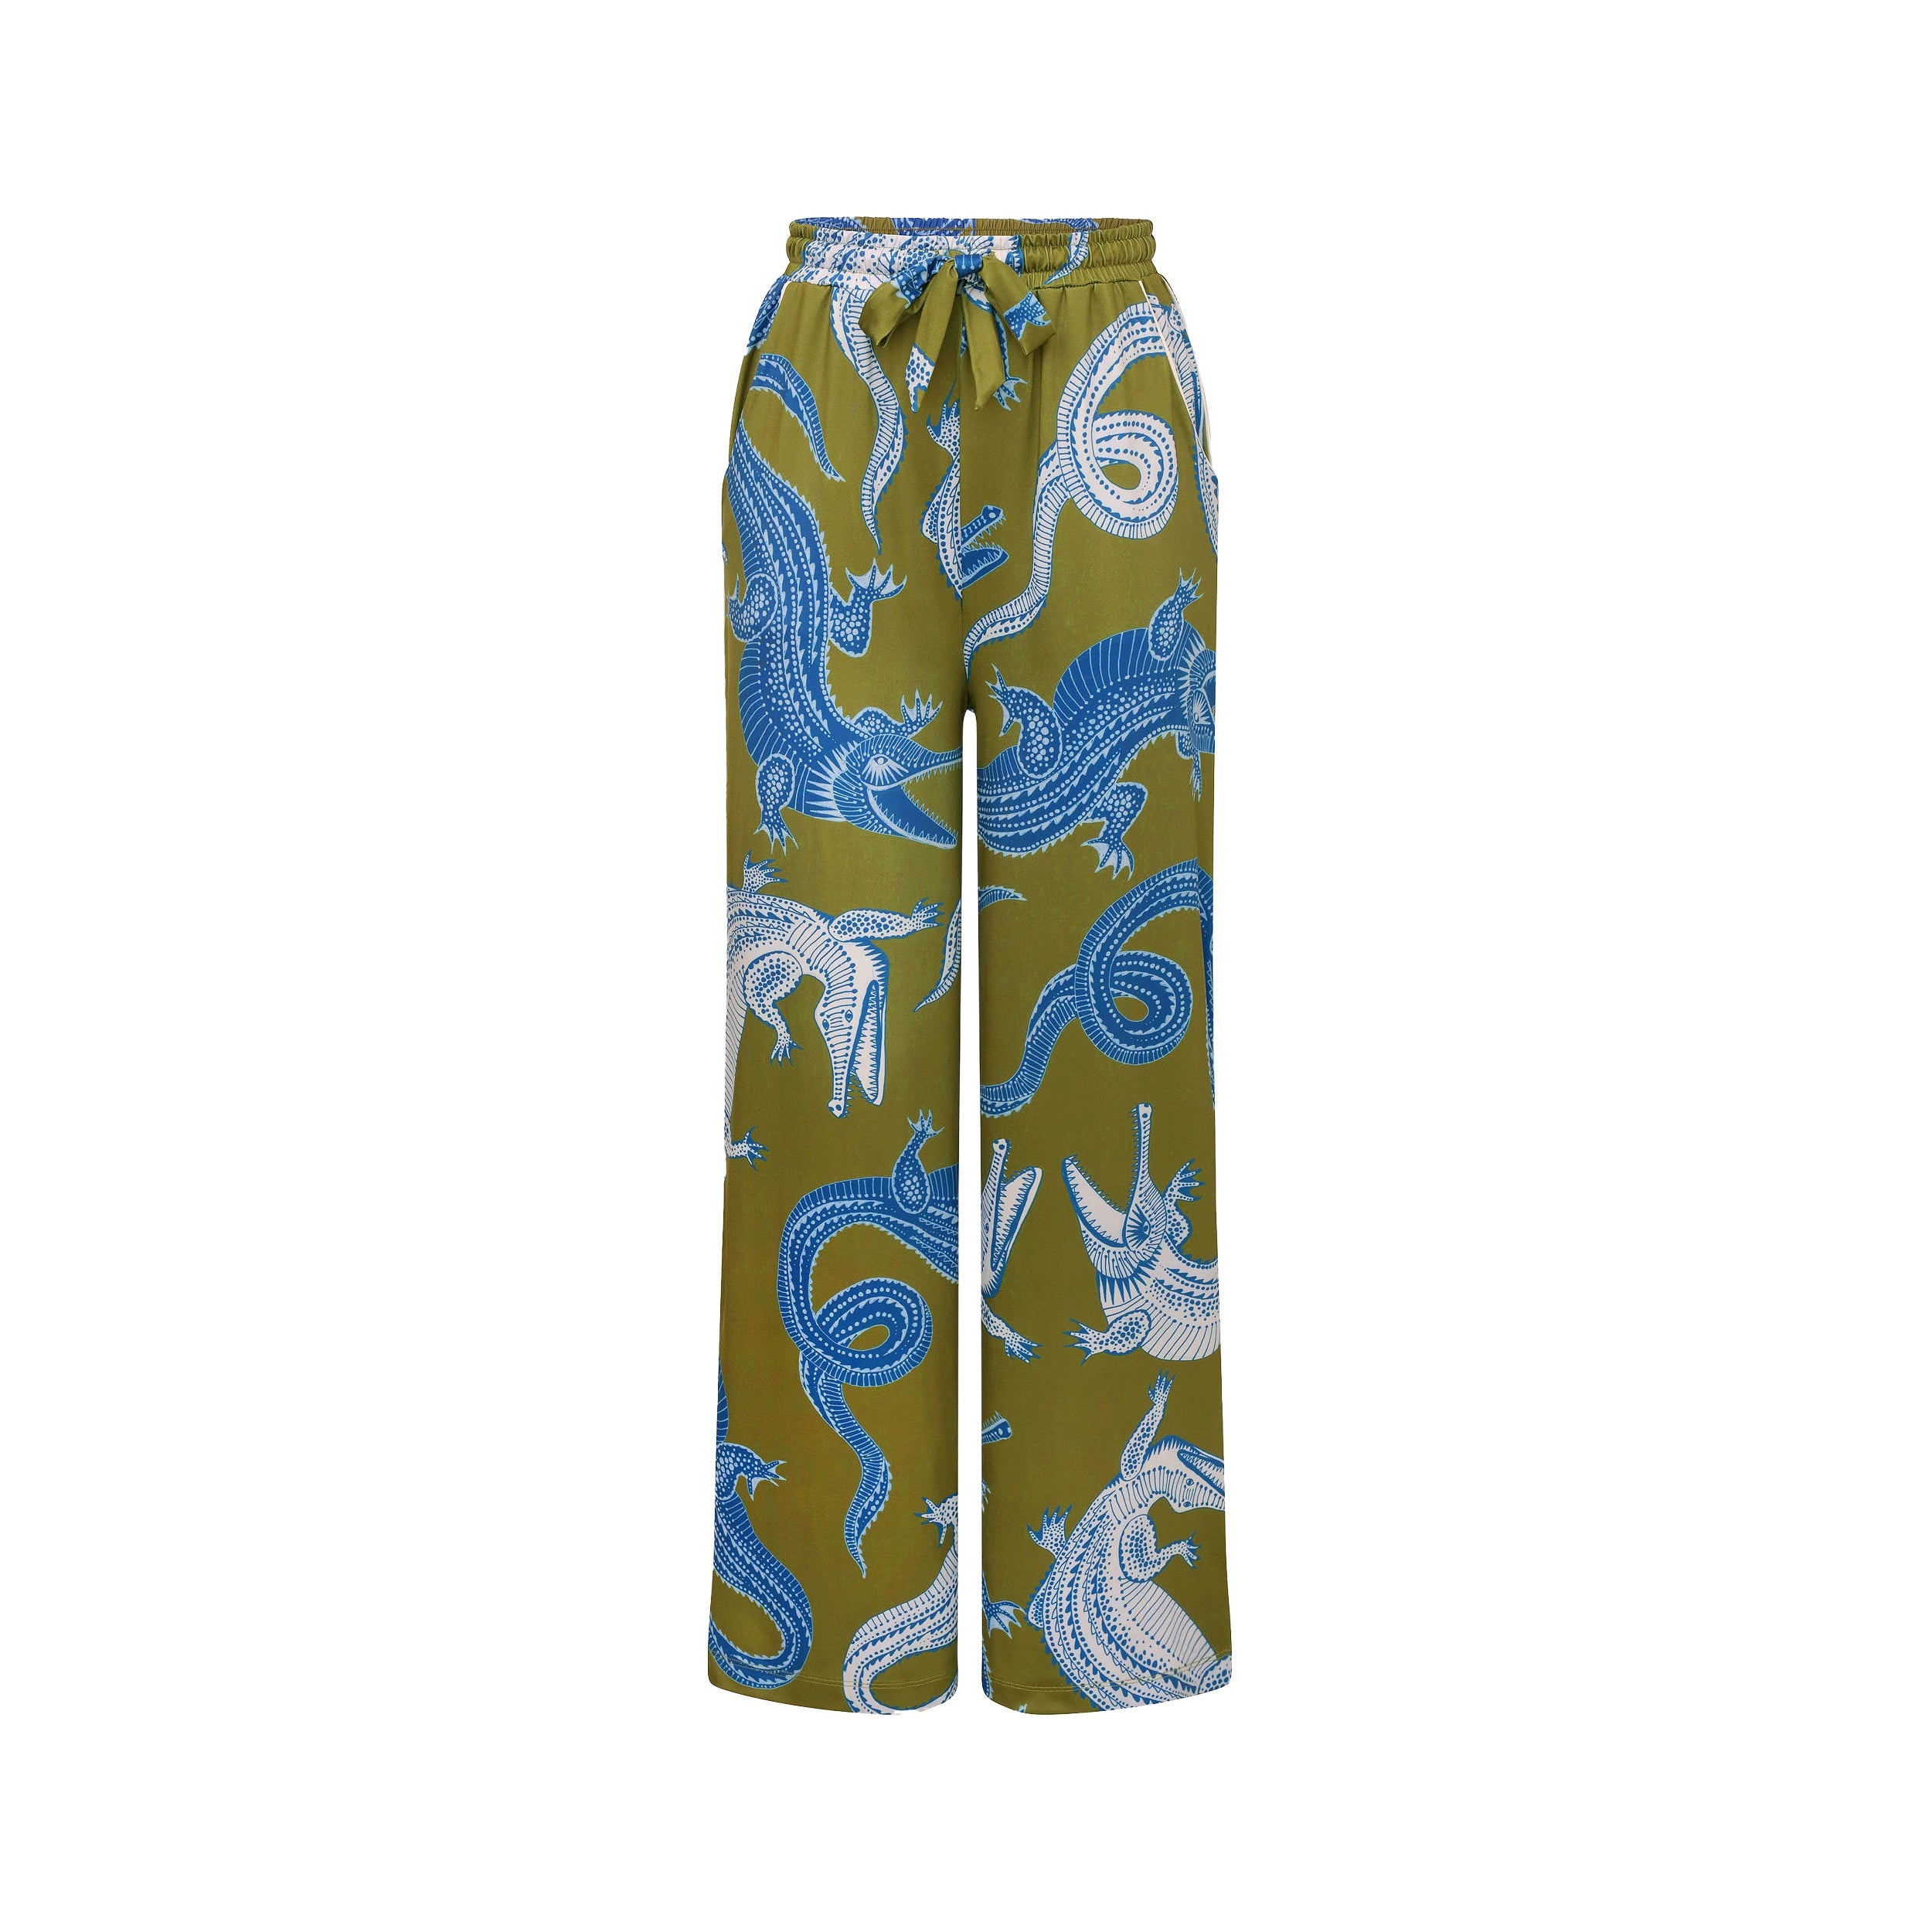 Product view of breathable, relaxed and buttery smooth pajama pant featuring high-waist cut, side pockets, front tie and stunning Nile gator print.